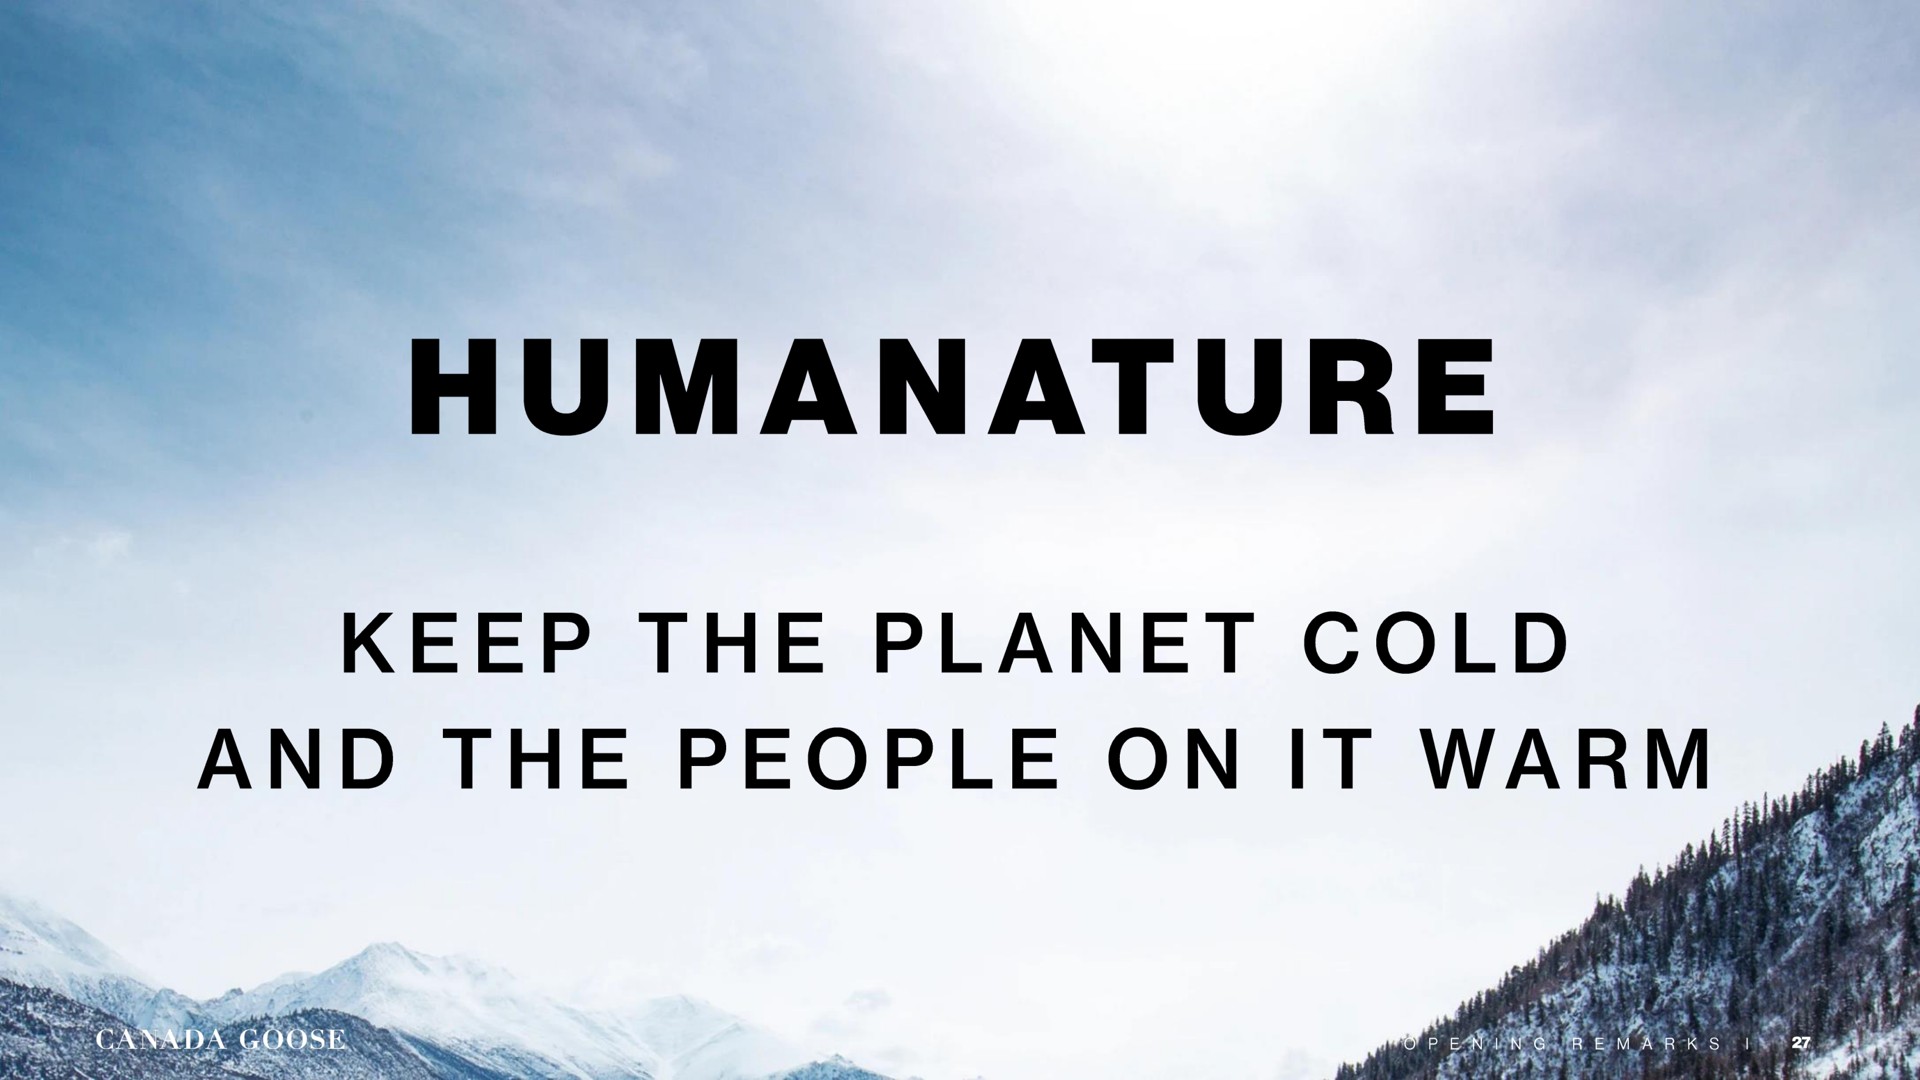 keep the planet cold | Canada Goose